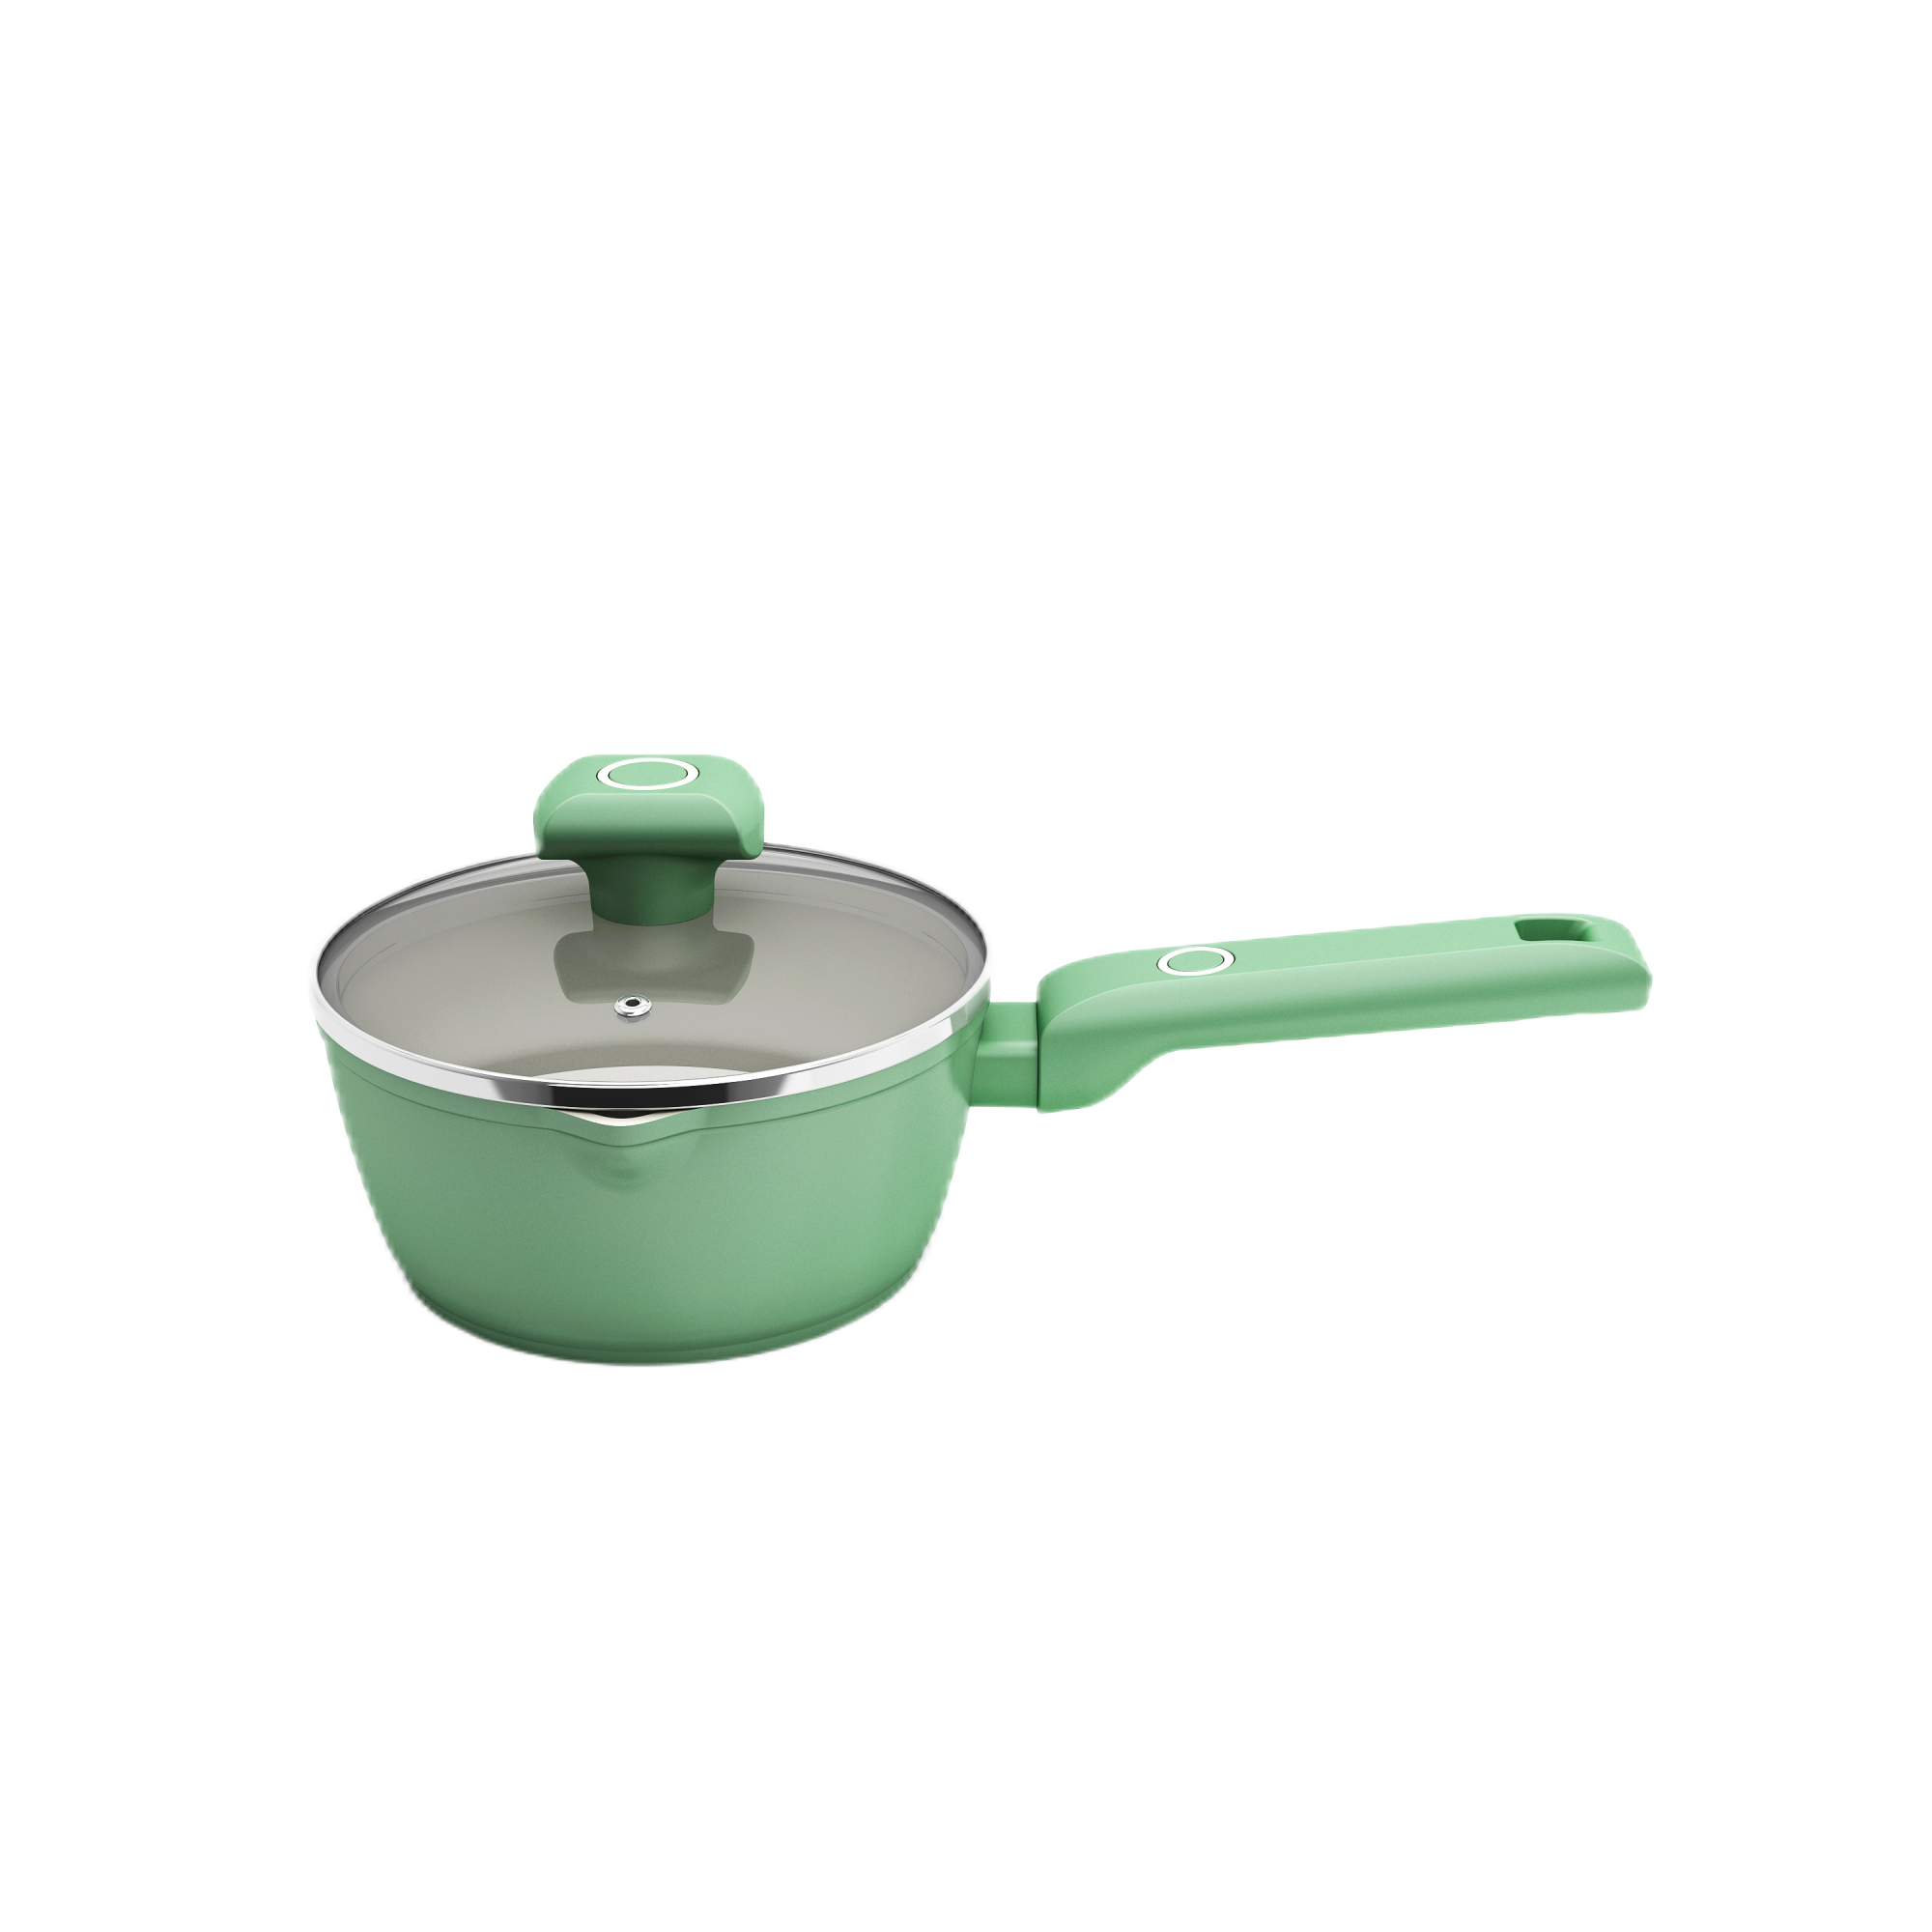 Ring Range Non-stick Cookware Aluminum Forged Saucepan With Lid